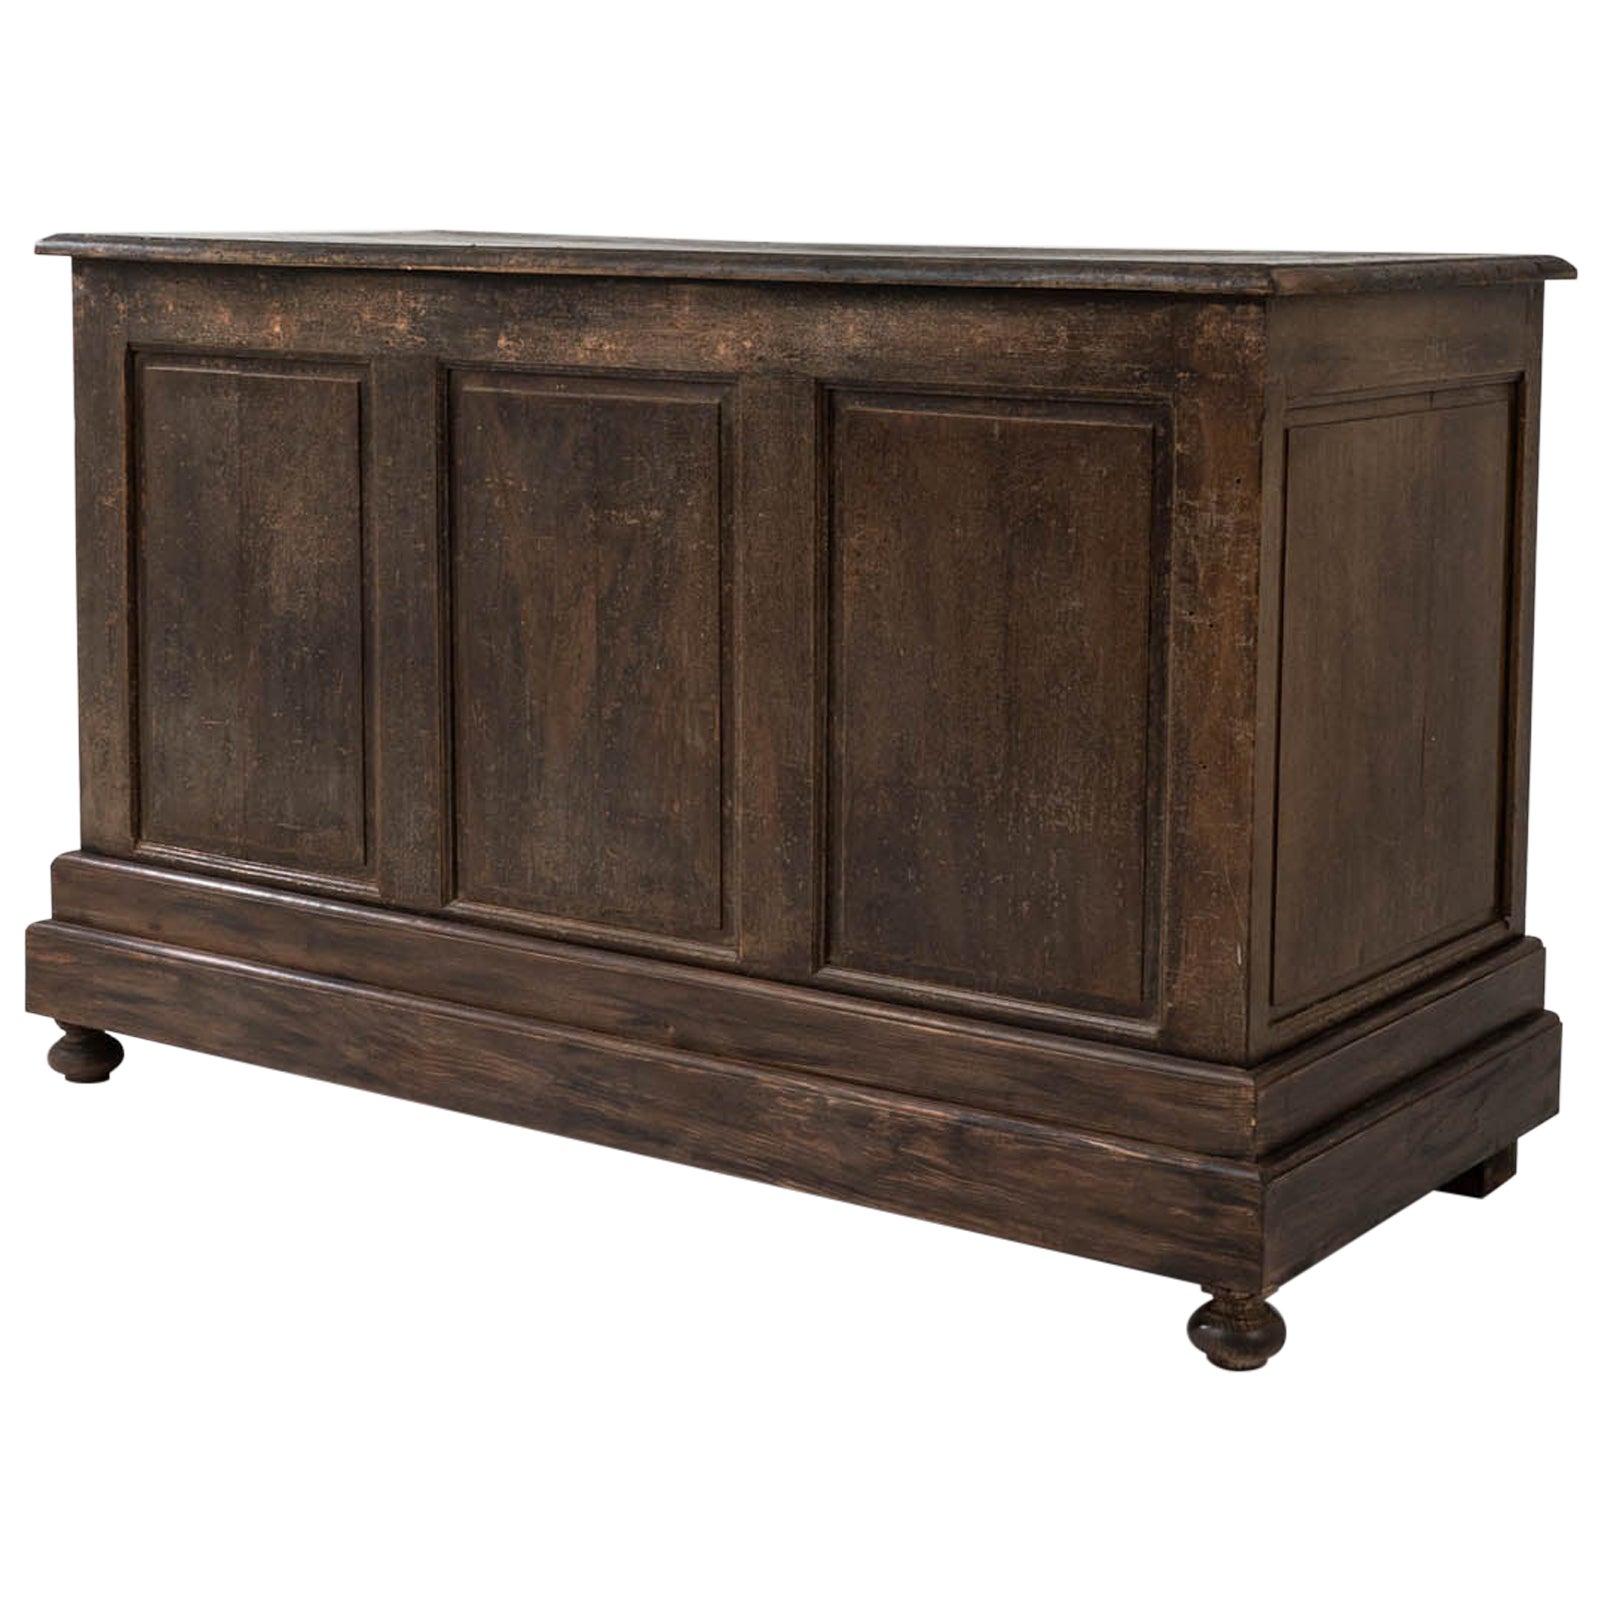 19th Century French Wooden Shop Counter